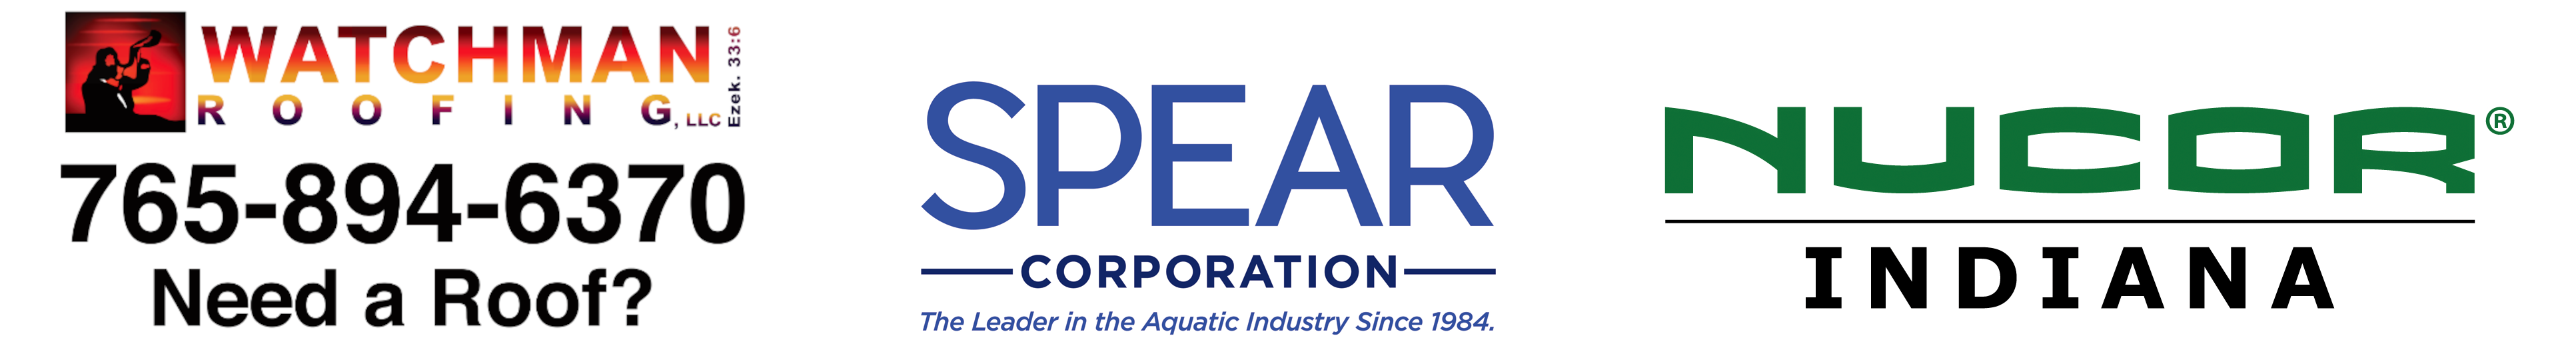 Watchman Roofing, Spear Corporation: The Leader in the Aquatic Industry Since 1984. Nucor Indiana"